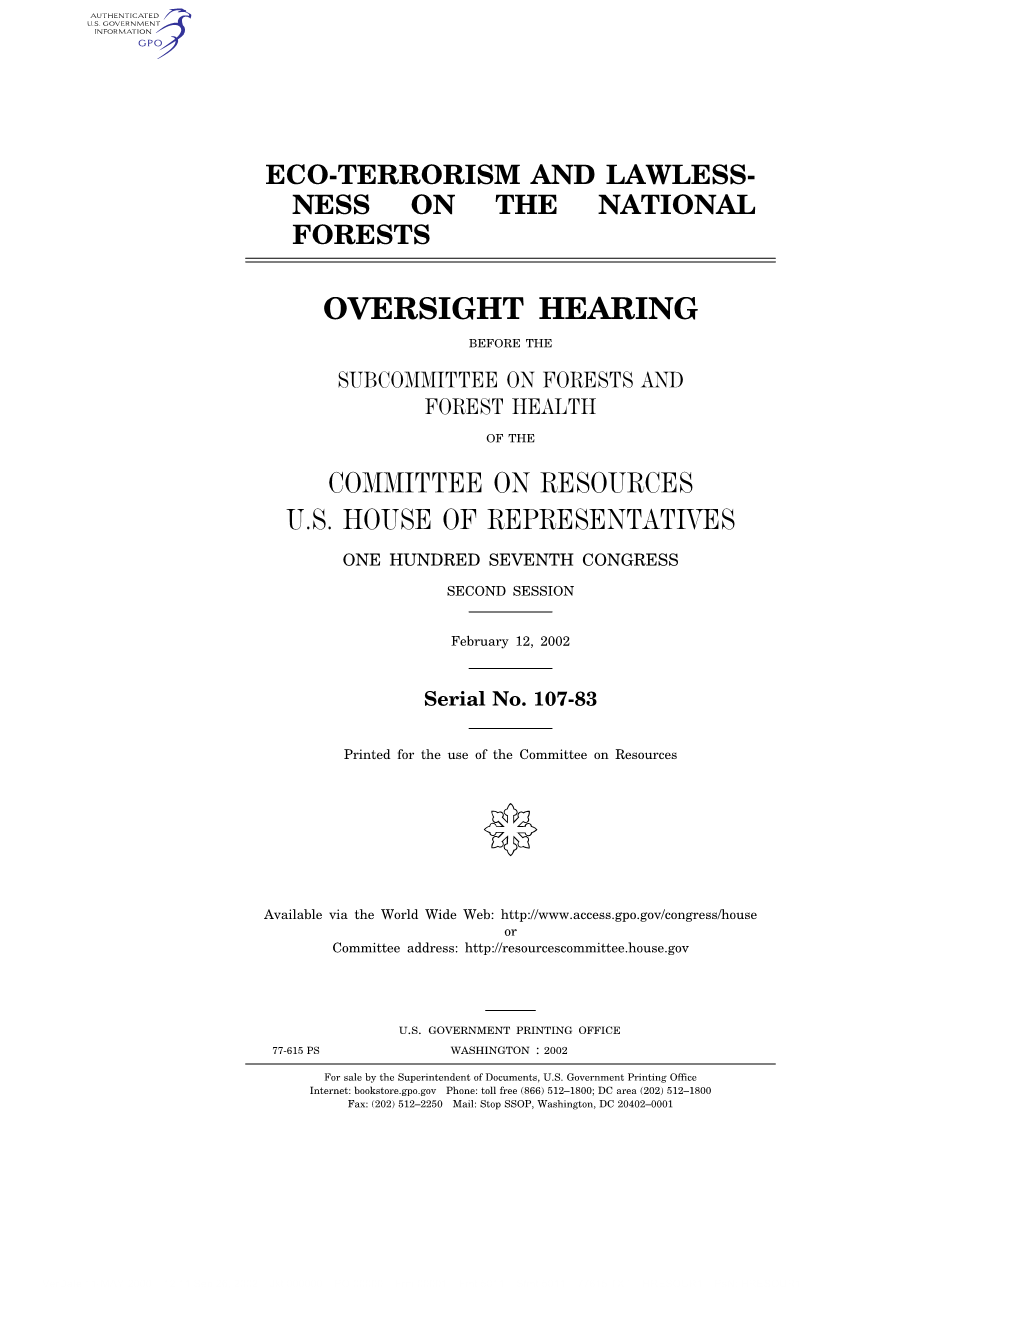 Oversight Hearing Committee on Resources U.S. House Of